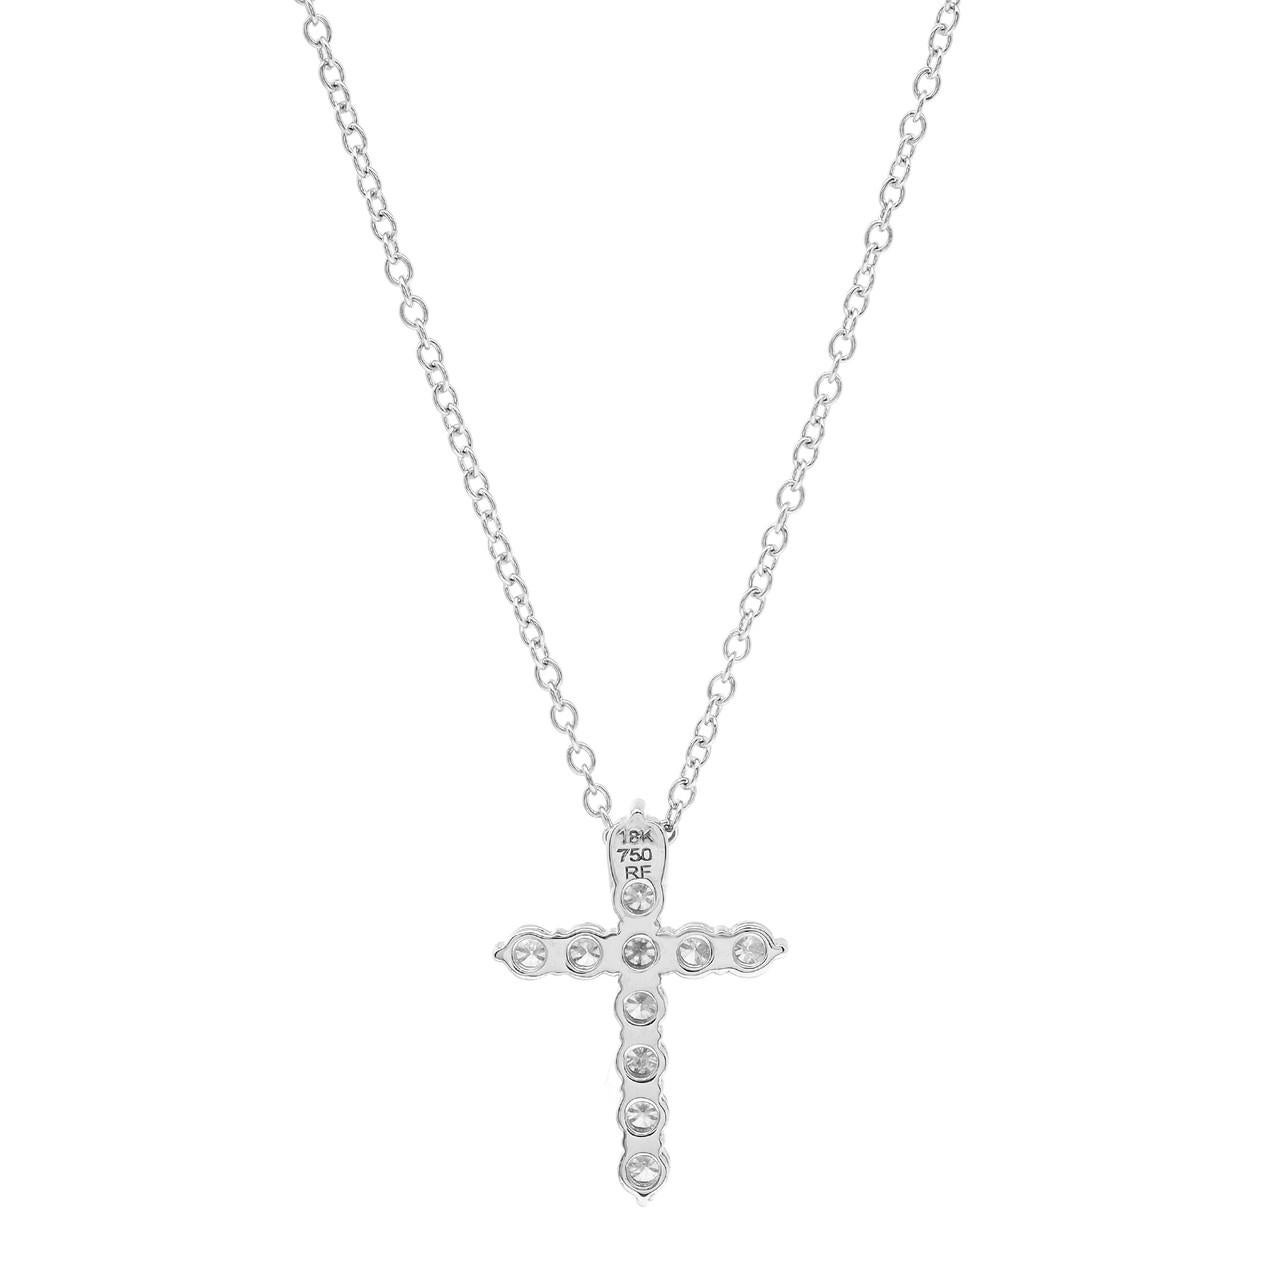 Presenting our stunning 0.46 Carat Diamond Cross Pendant Necklace in 18K White Gold! This necklace beautifully showcases your faith with a brilliant sparkle. The cross pendant is meticulously crafted with diamonds covering its surface, creating a